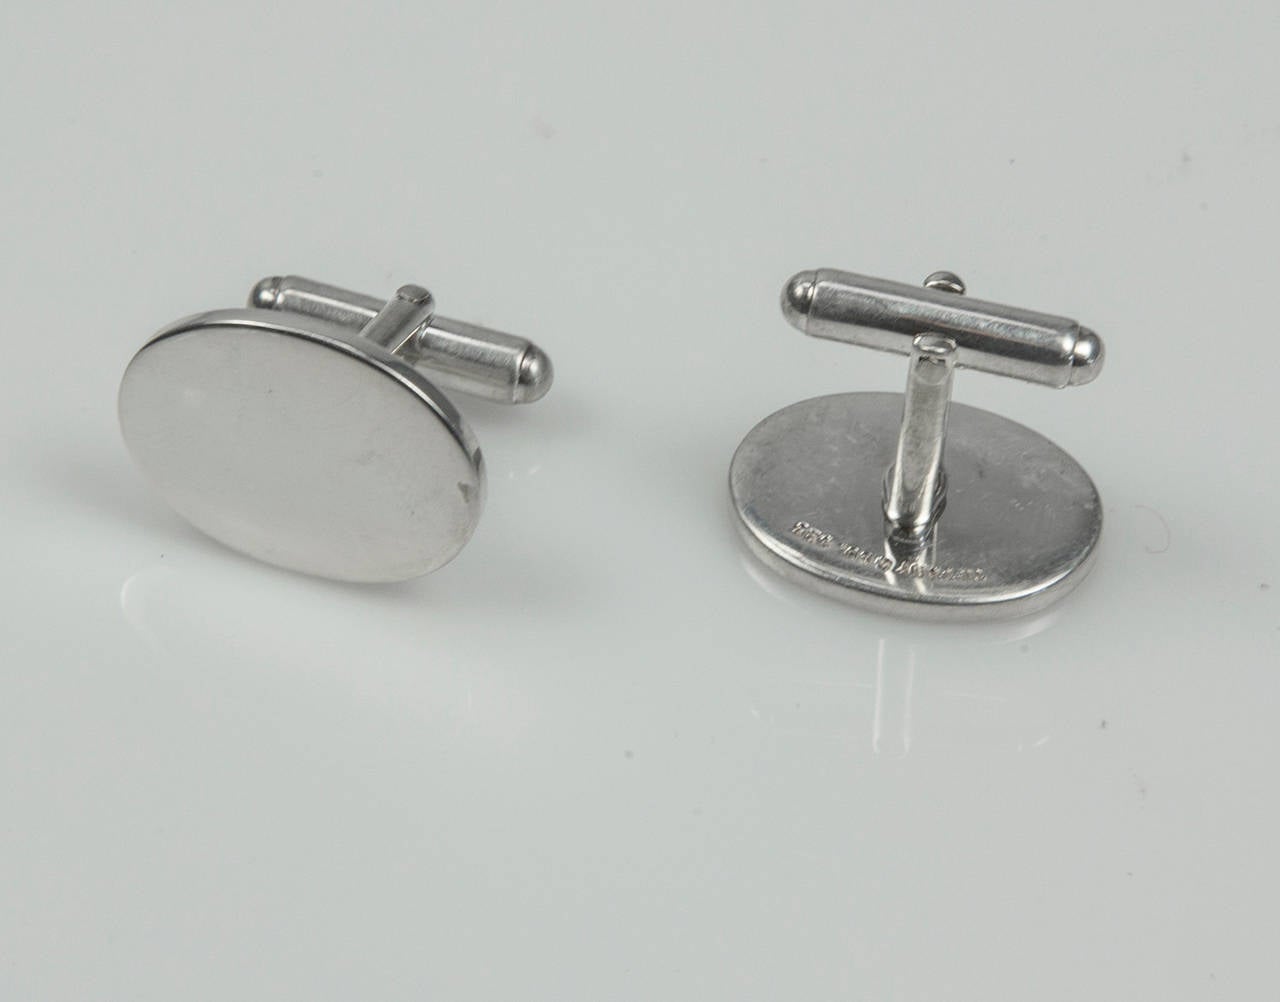 Tiffany & Co. Classic Sterling Silver Cufflinks In Excellent Condition For Sale In Montreal, QC